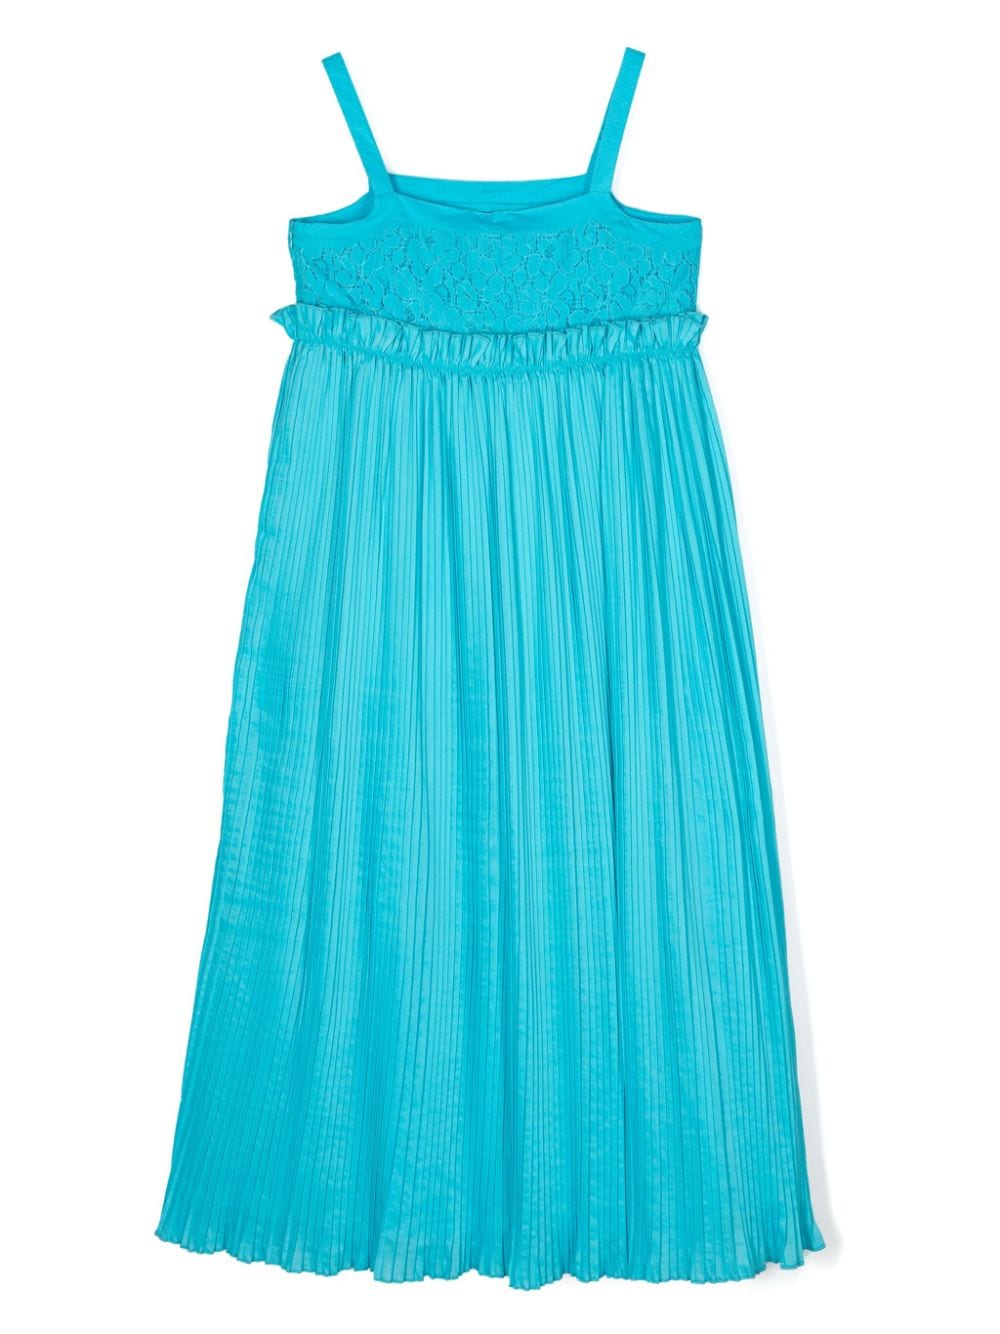 Turquoise dress for girls